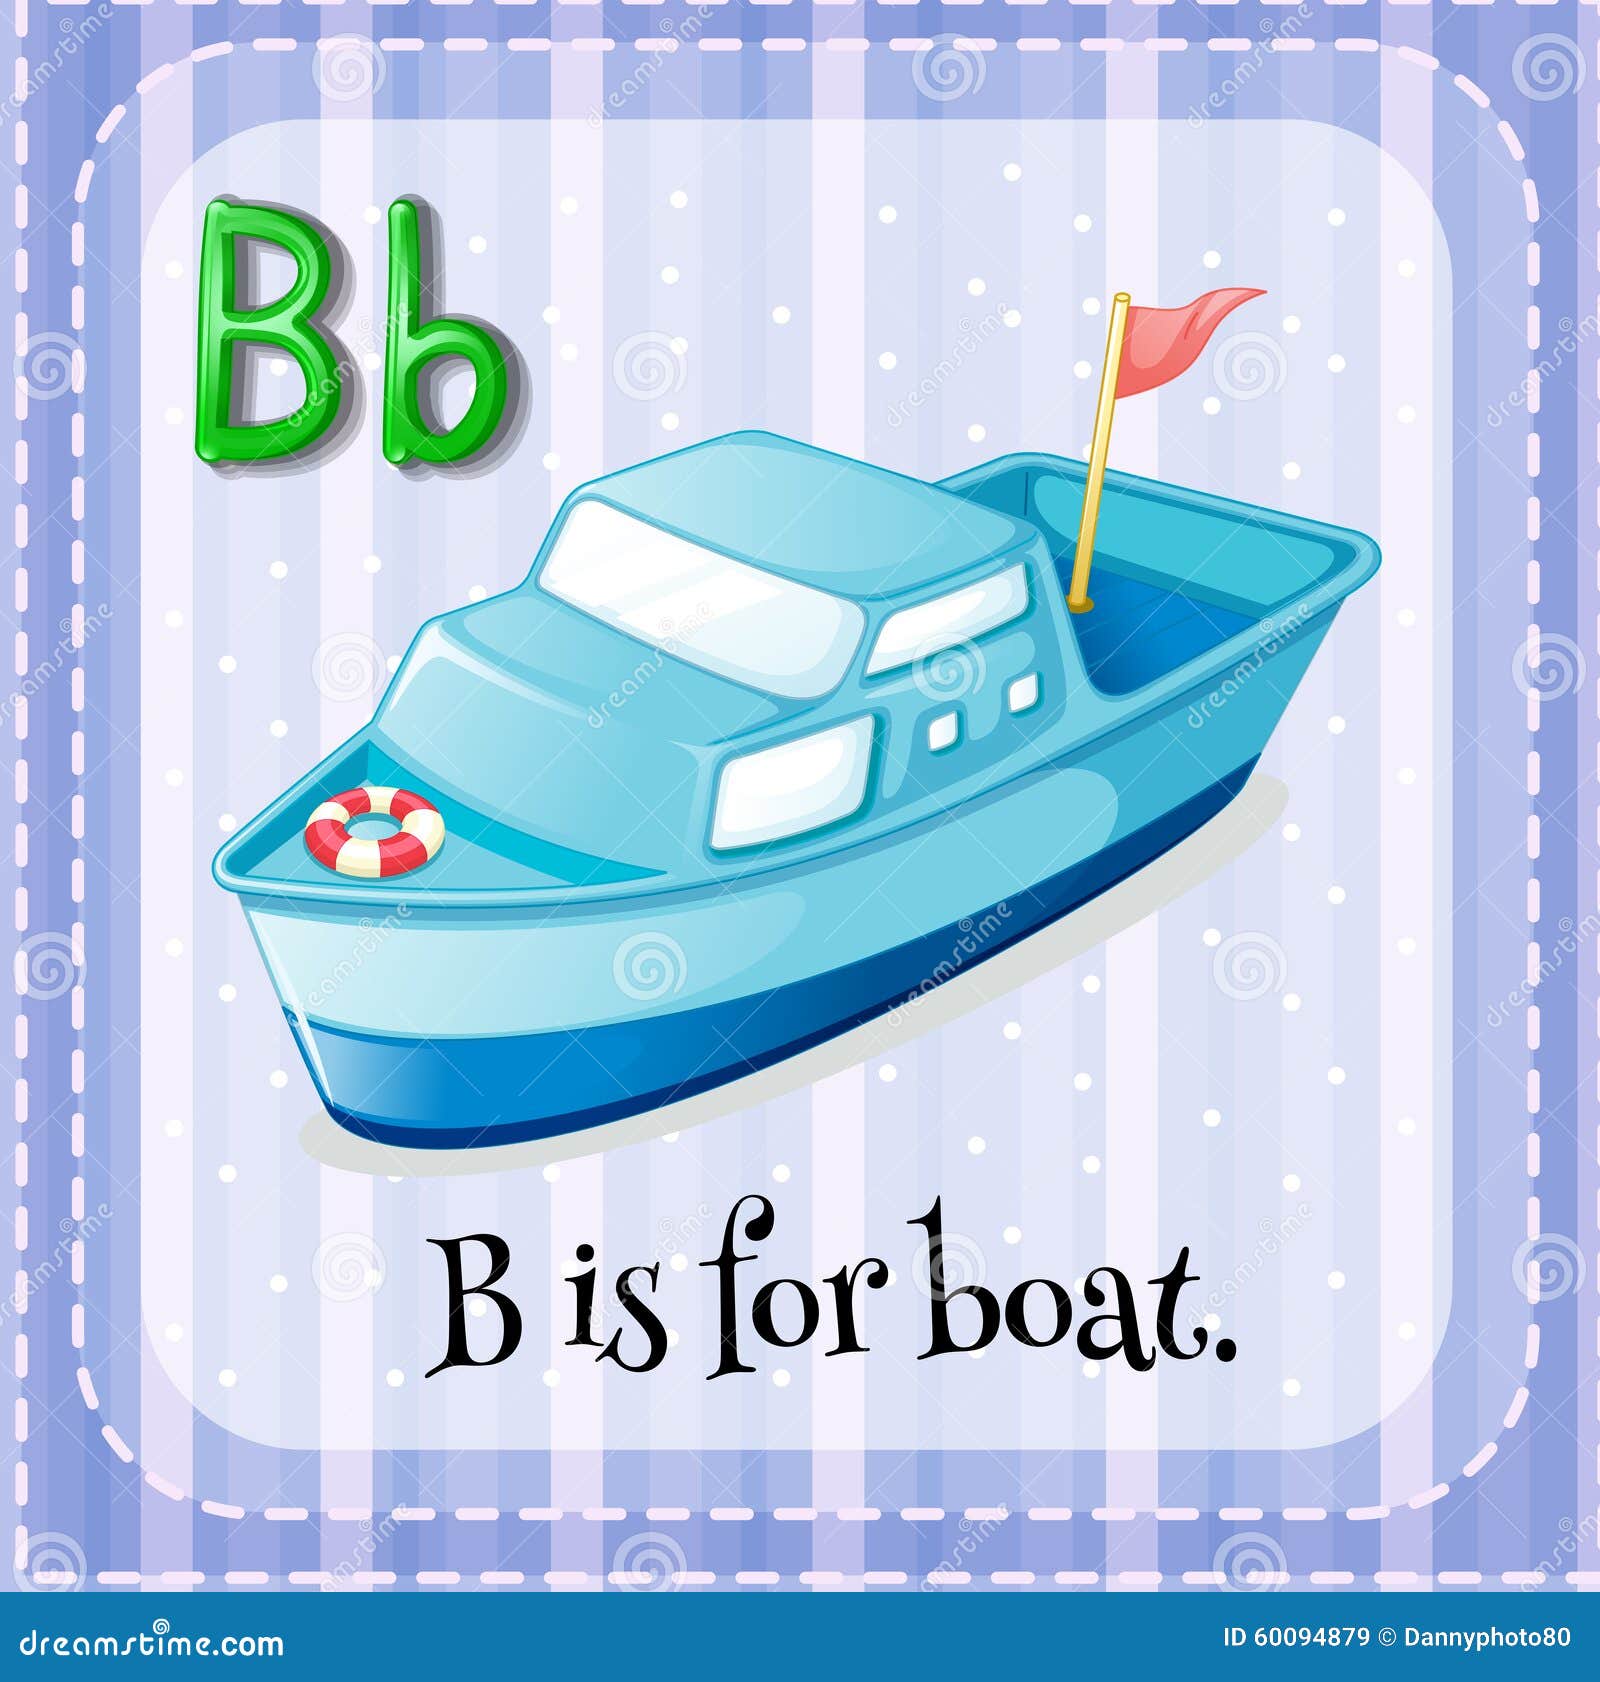 Flashcard Letter B Is For Boat Stock Vector - Image: 60094879